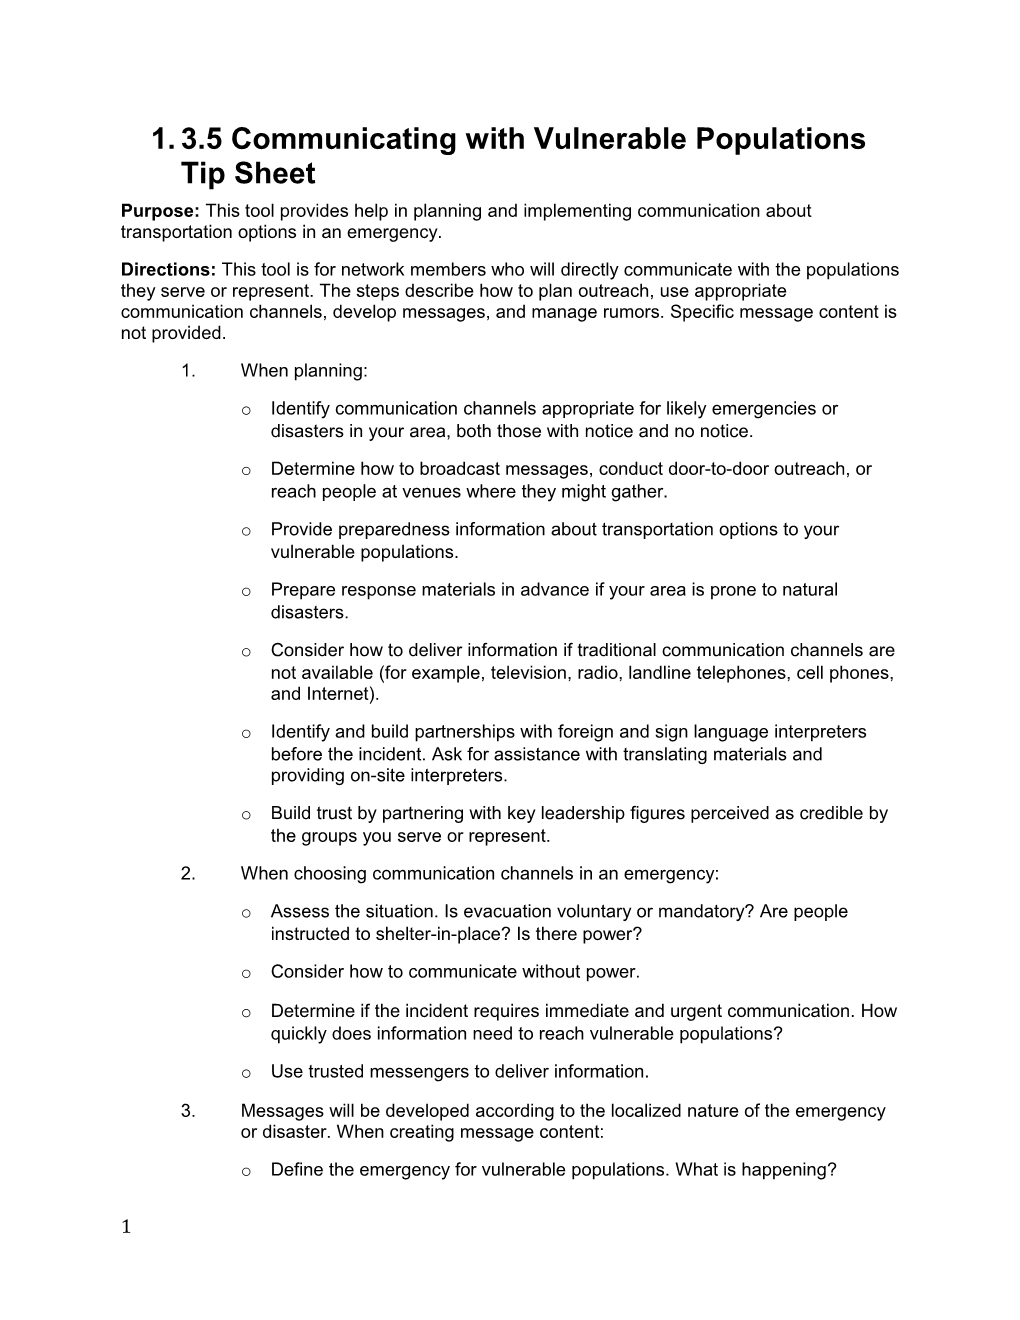 3.5 Communicating with Vulnerable Populations Tip Sheet